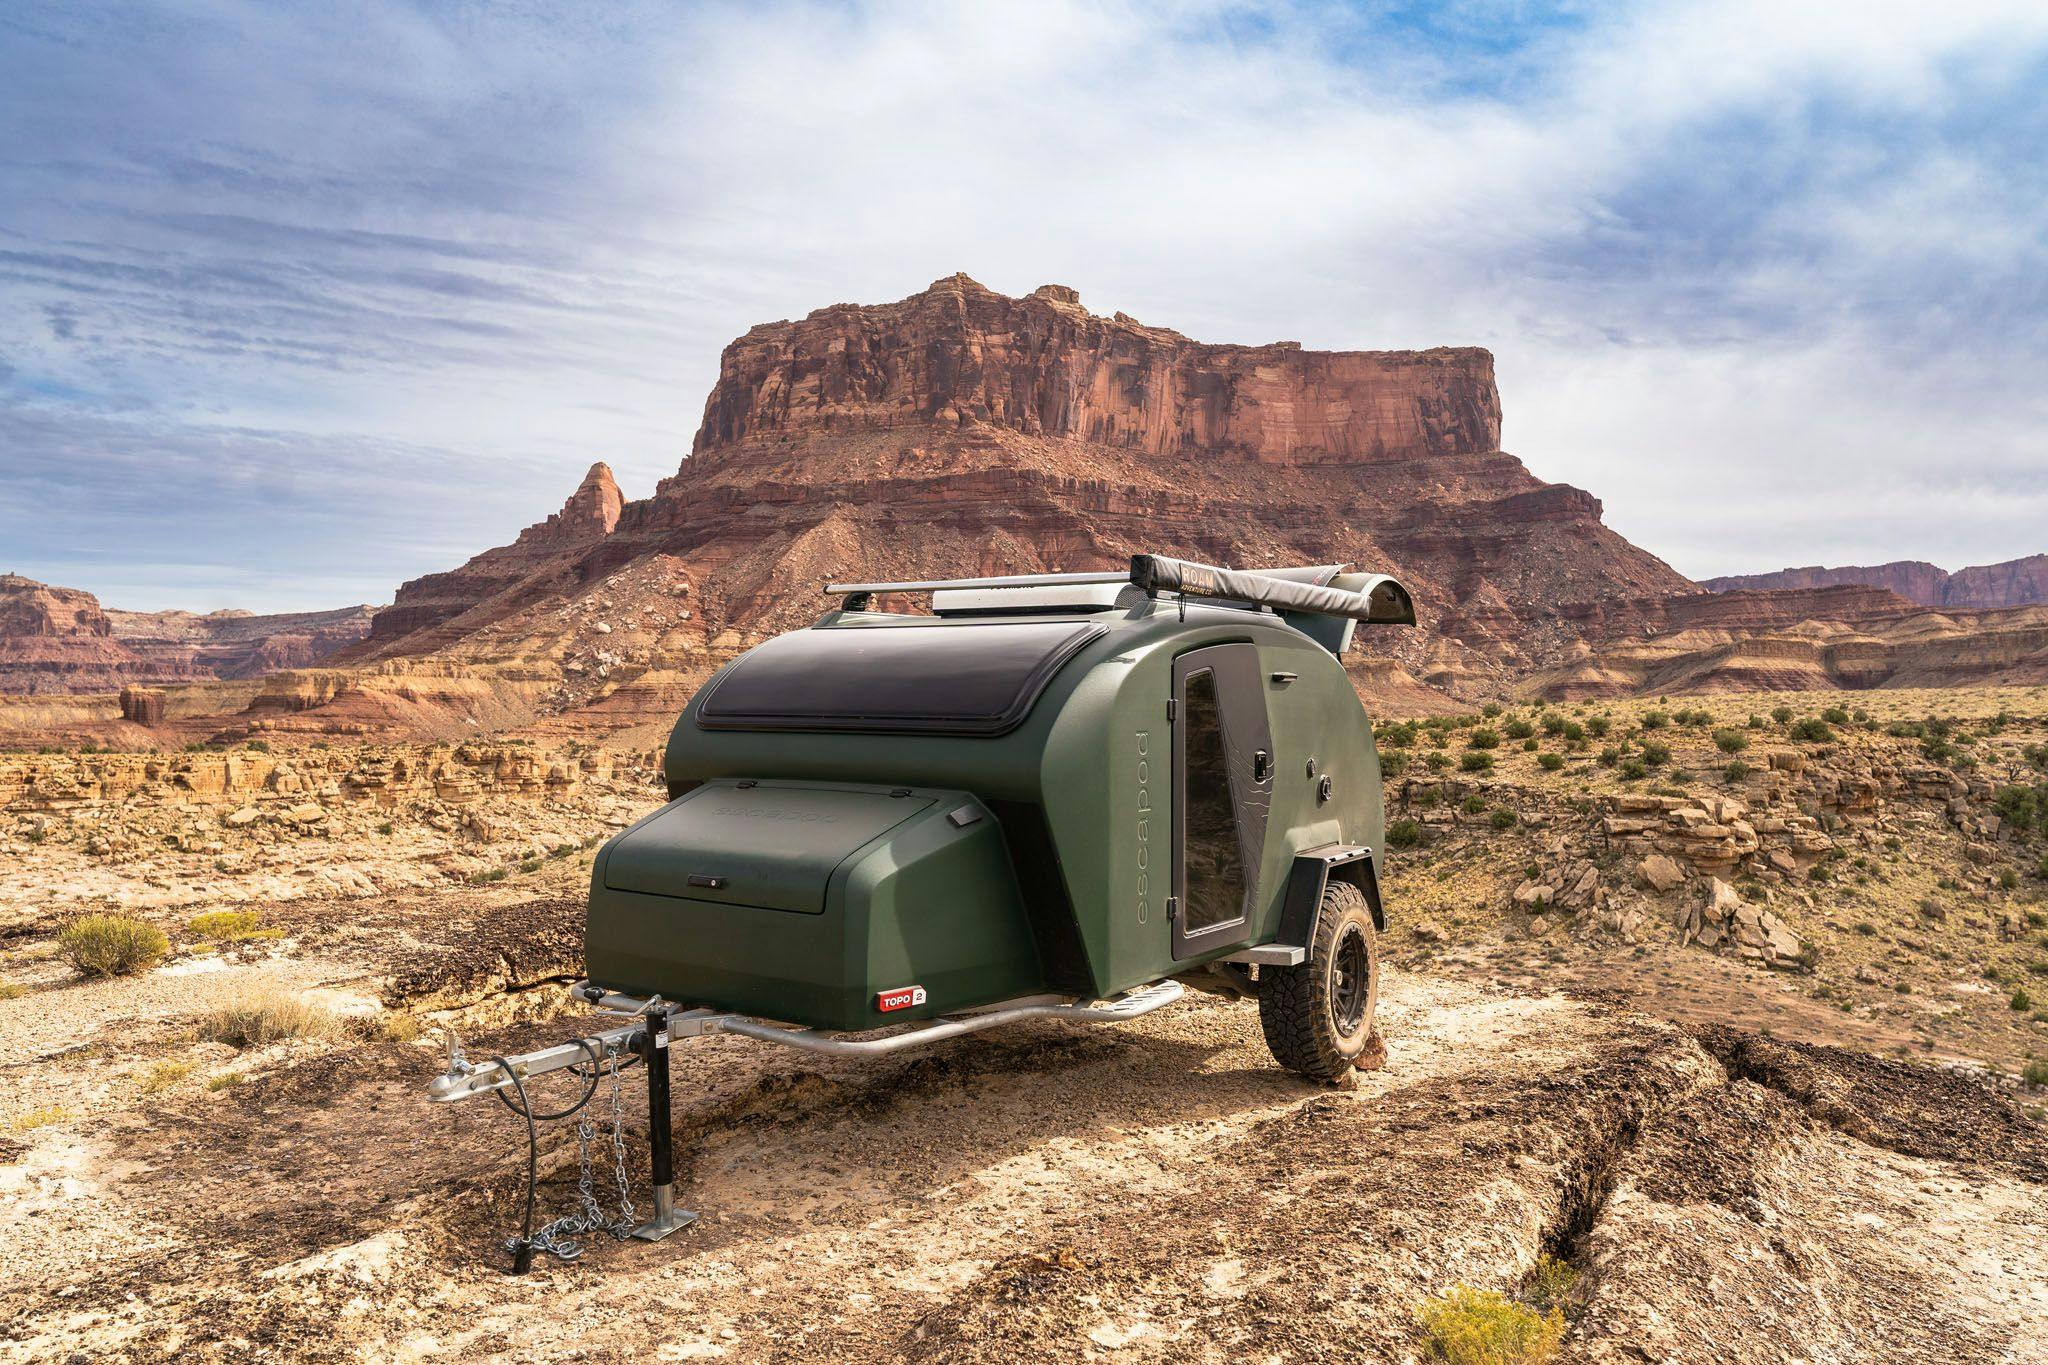 A green TOPO2 fiberglass camping trailer is parked on a rocky outcropping with a backdrop of a red rock mesa in the distance.